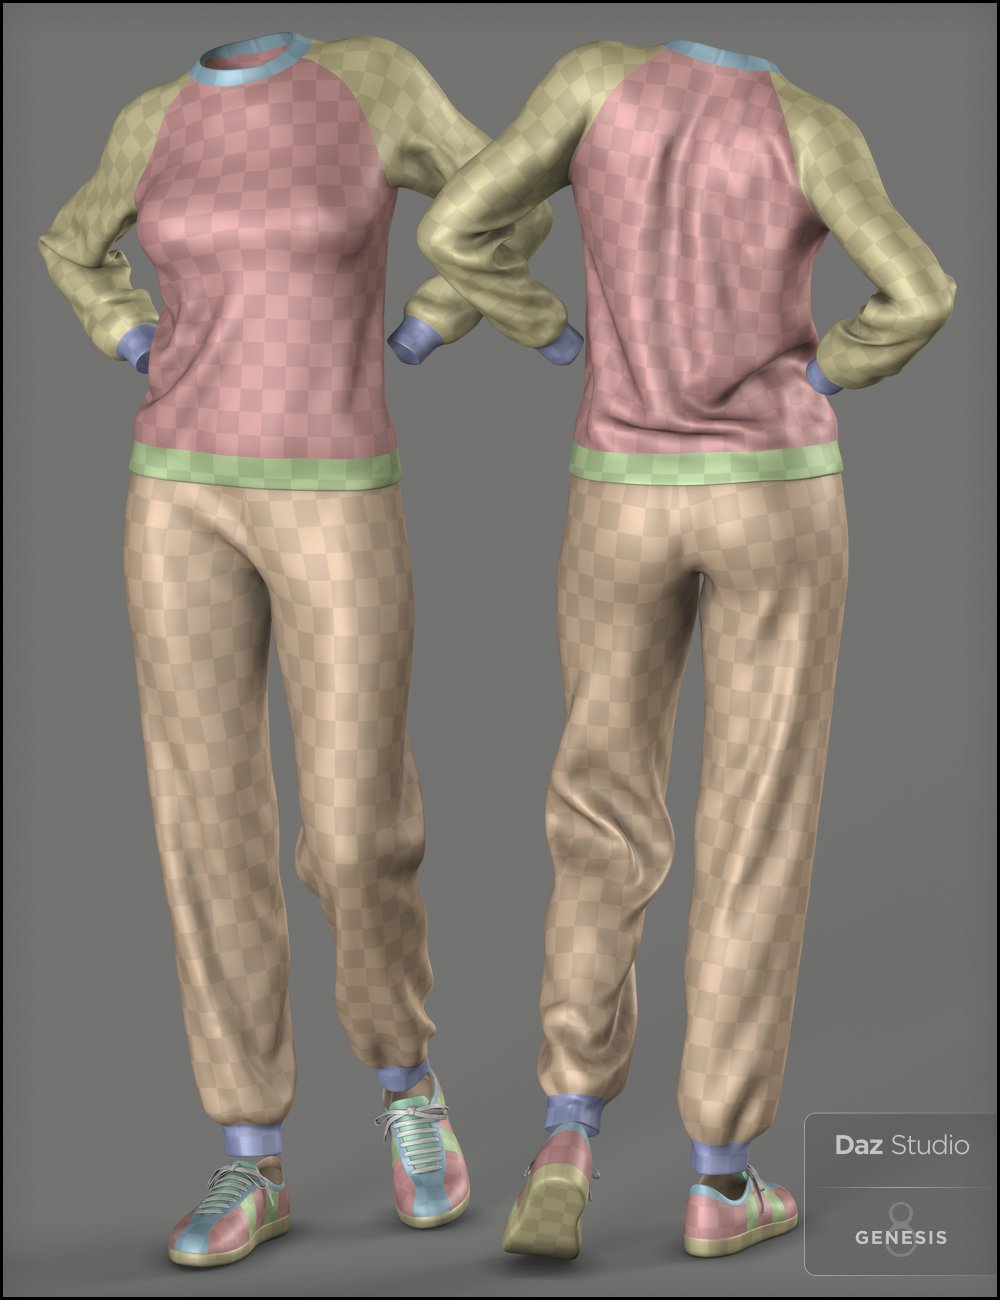 dForce Retro Sweatsuit for Genesis 8 Female(s) and Male(s) by: Fisty & Darc, 3D Models by Daz 3D